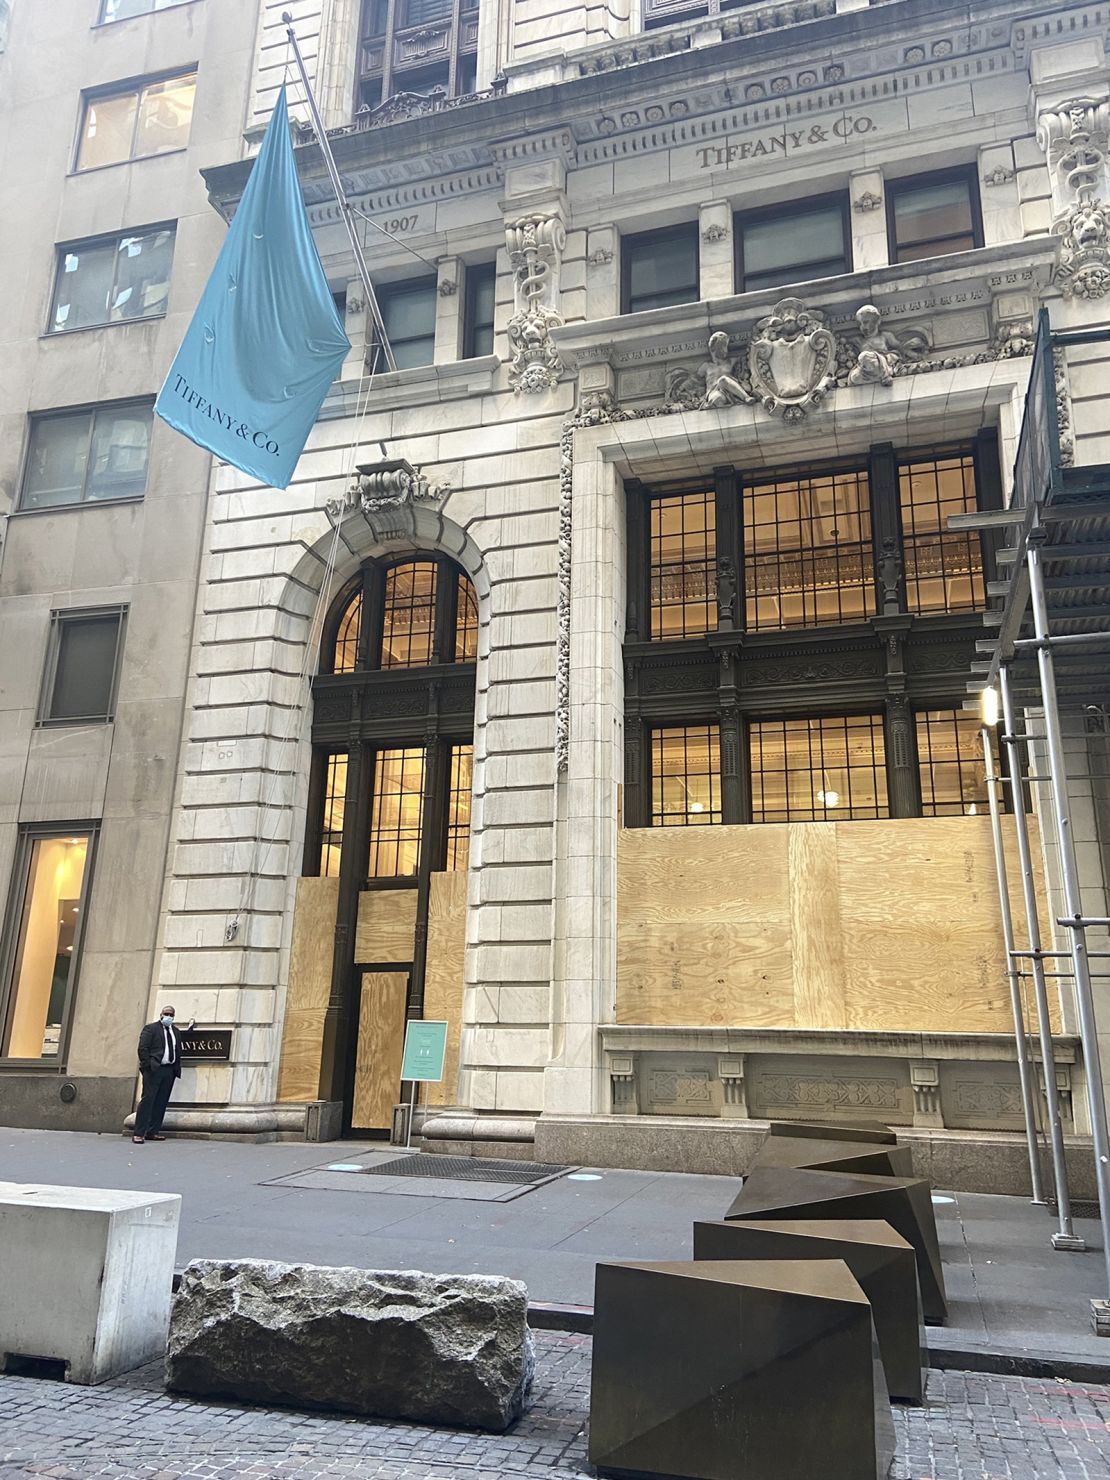 A Tiffany store boarded up in New York. Tiffany and other retailers are bracing for election-related unrest.